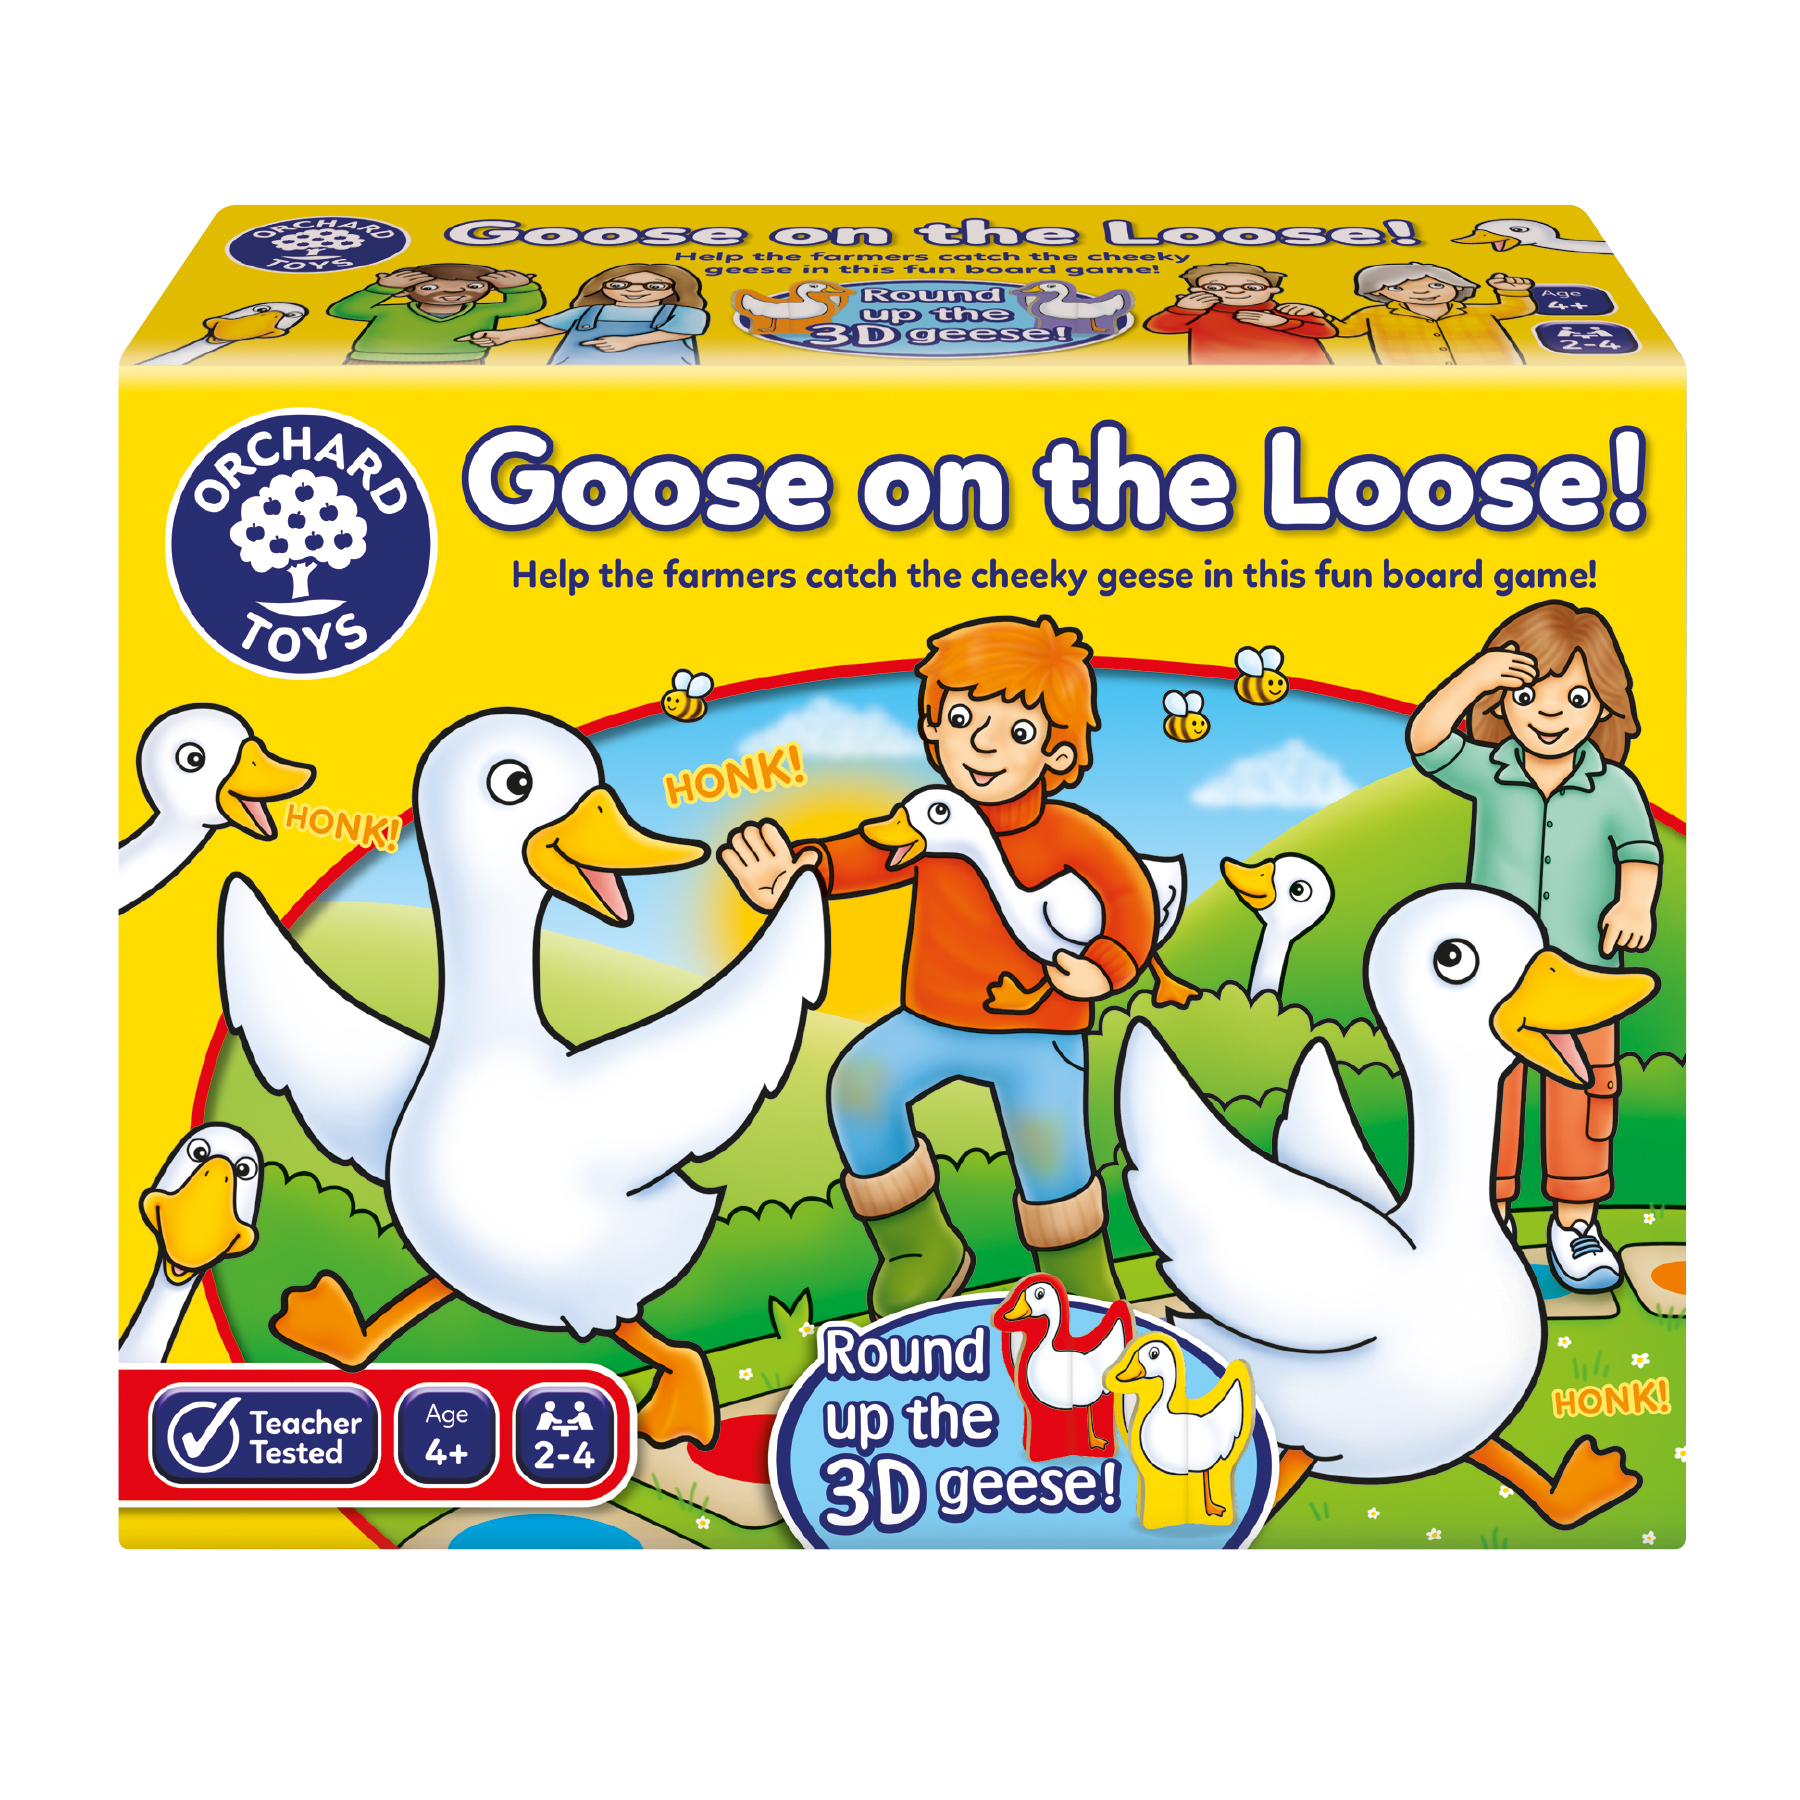 Goose on the Loose Game, worth £14.00